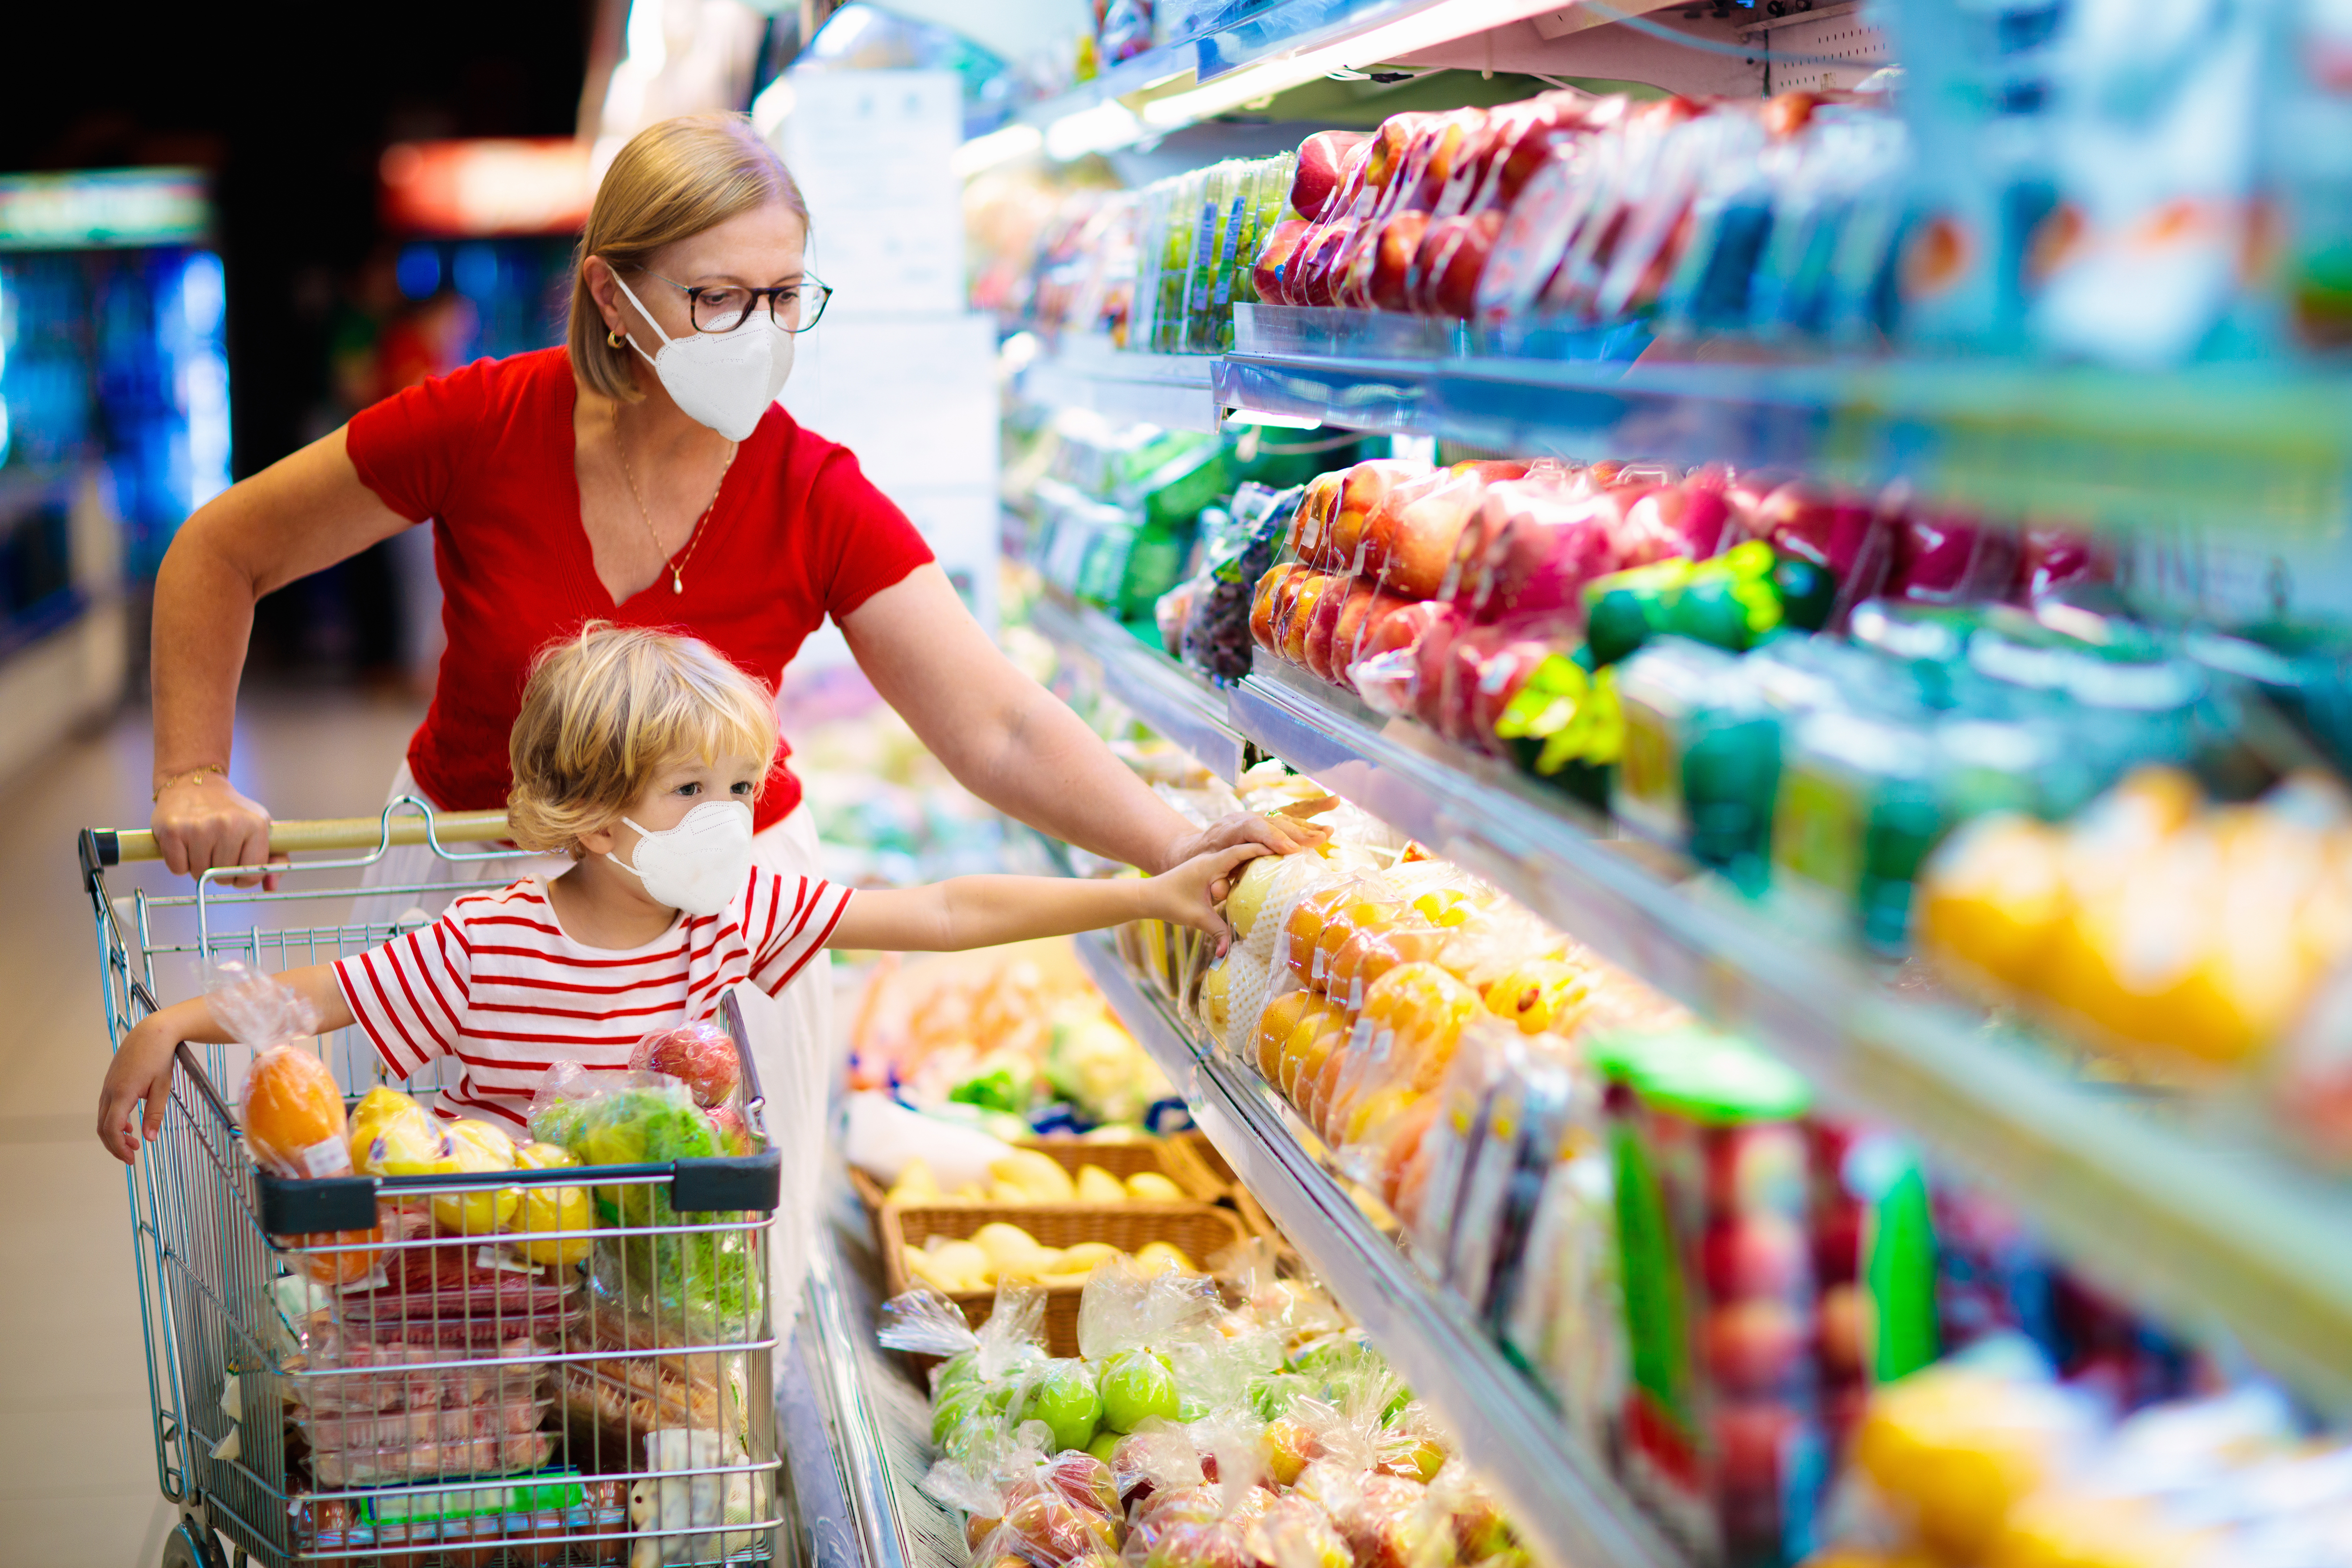 Mother and child in a grocery store | Source: Shutterstock